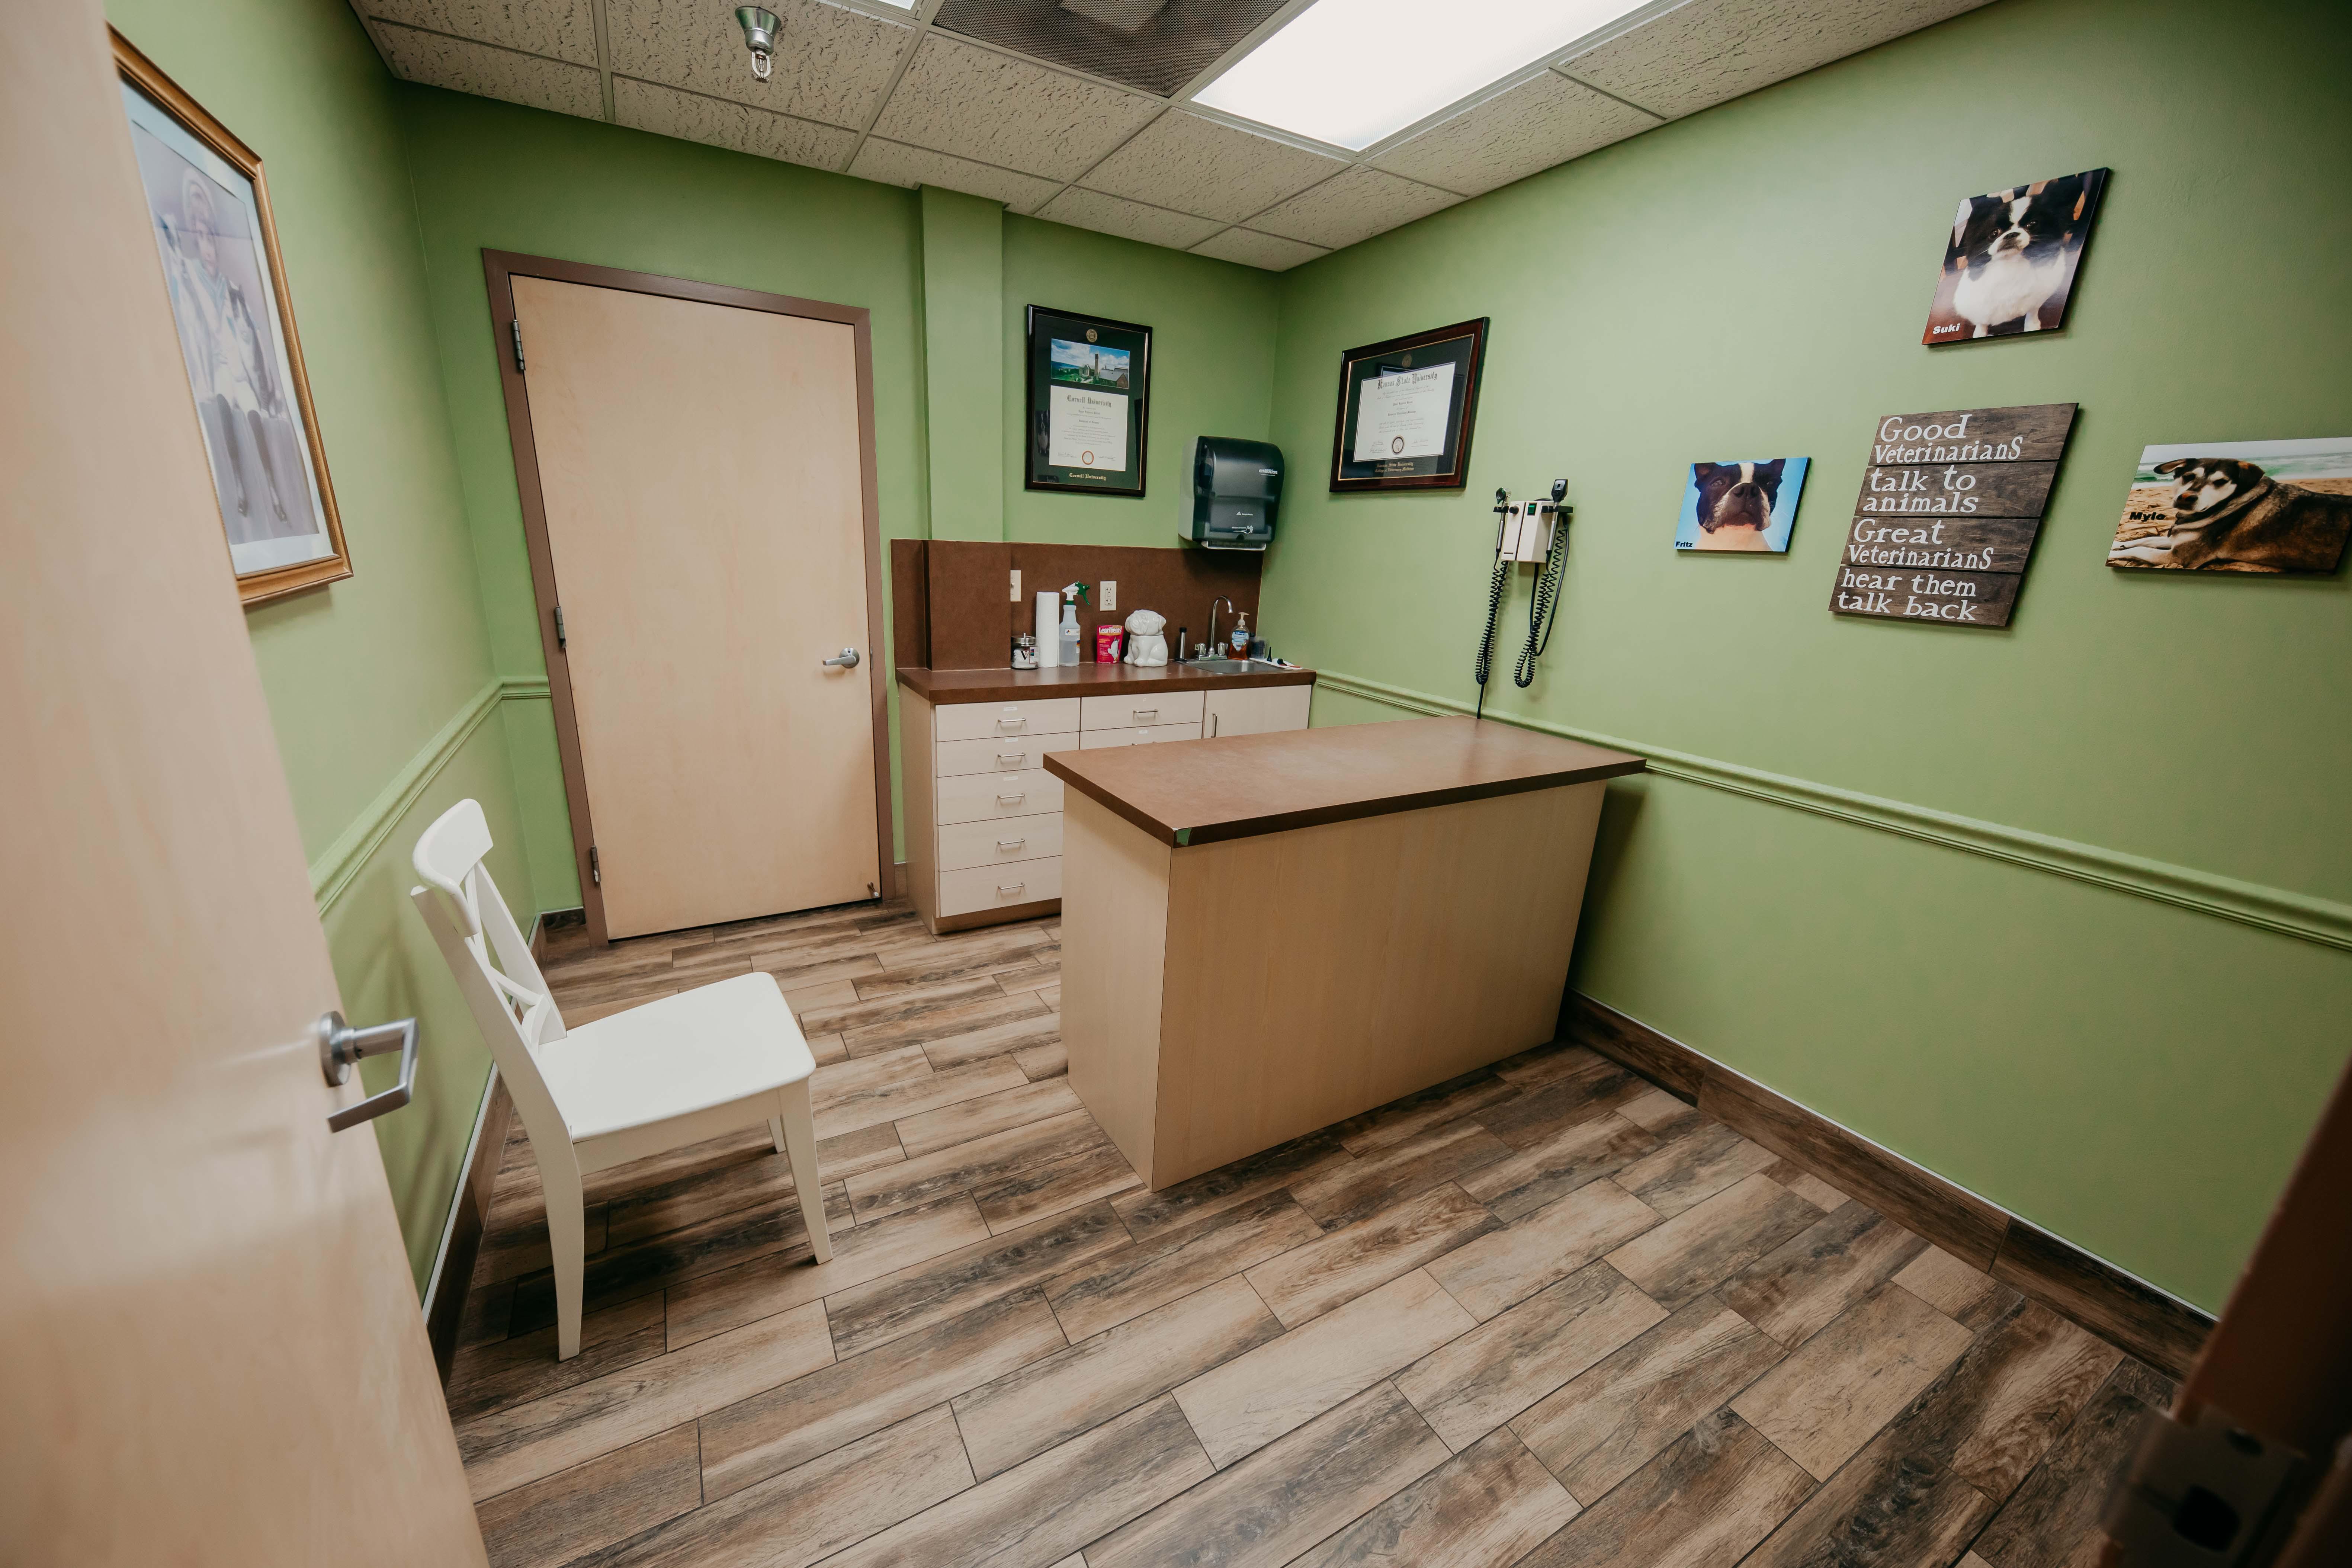 Festival Veterinary Clinic has multiple private exam rooms where your pet will be examined by one of our experienced veterinarians.